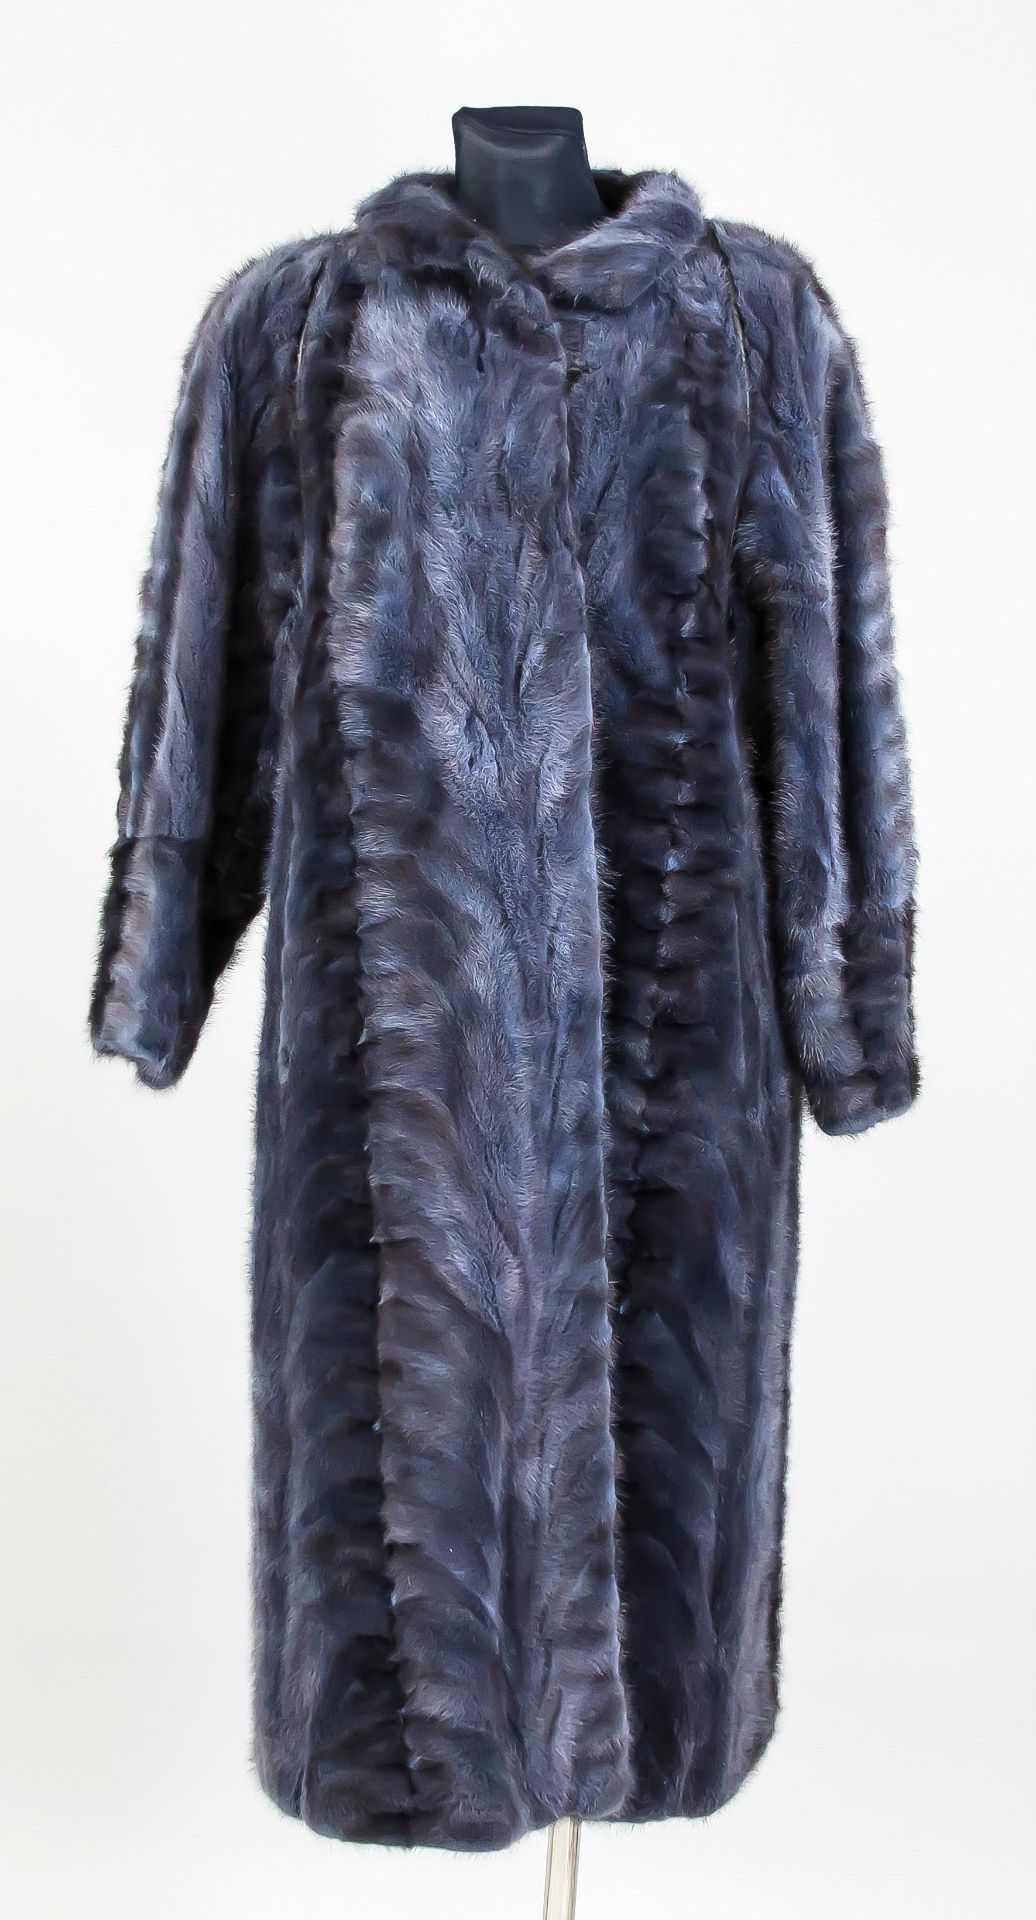 Ladies mink coat, blue black. Without label or size indication, slight signs of wear.